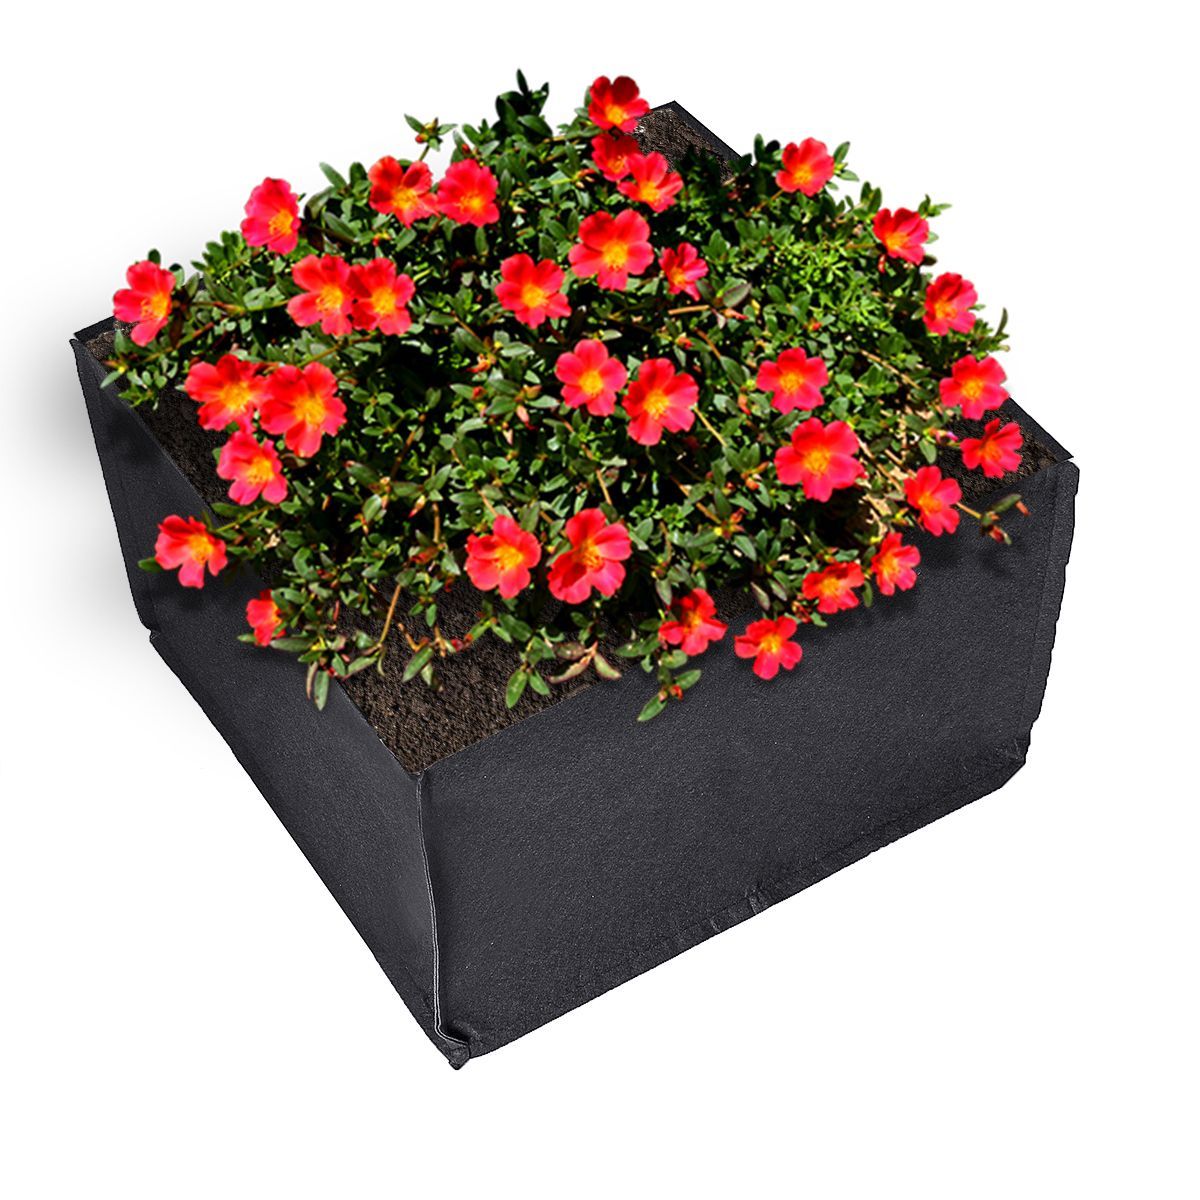 Planting-Box-Growing-Bag-Raised-Bed-Liners-Contain-the-Mess-1752266